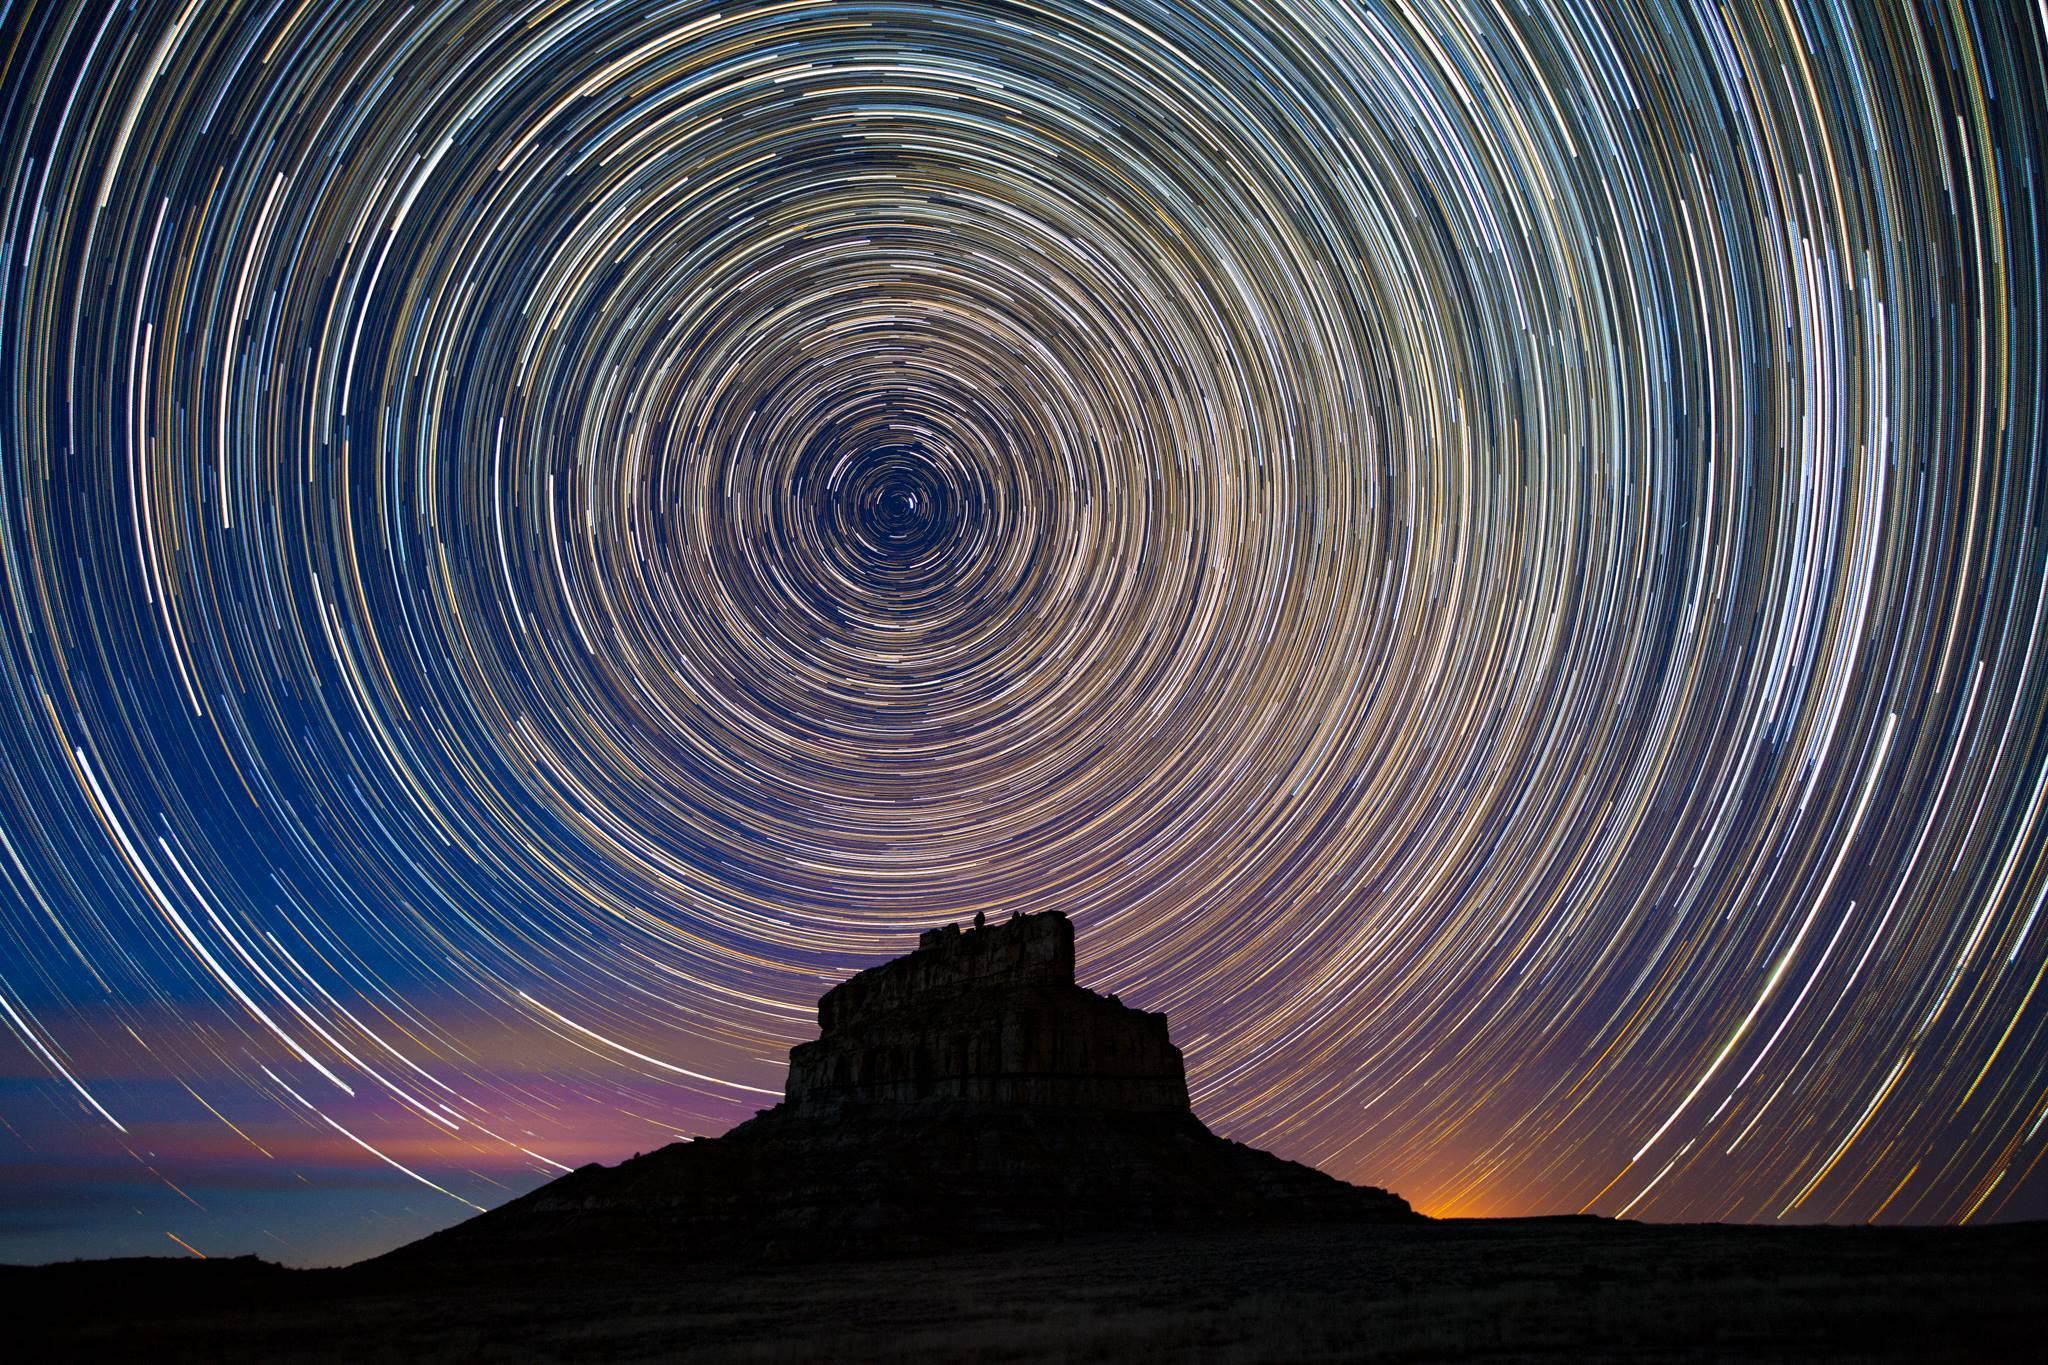 Fajada Butte's silhoutte shown under a timelapse image of stars appearing in a vibrant circle above.